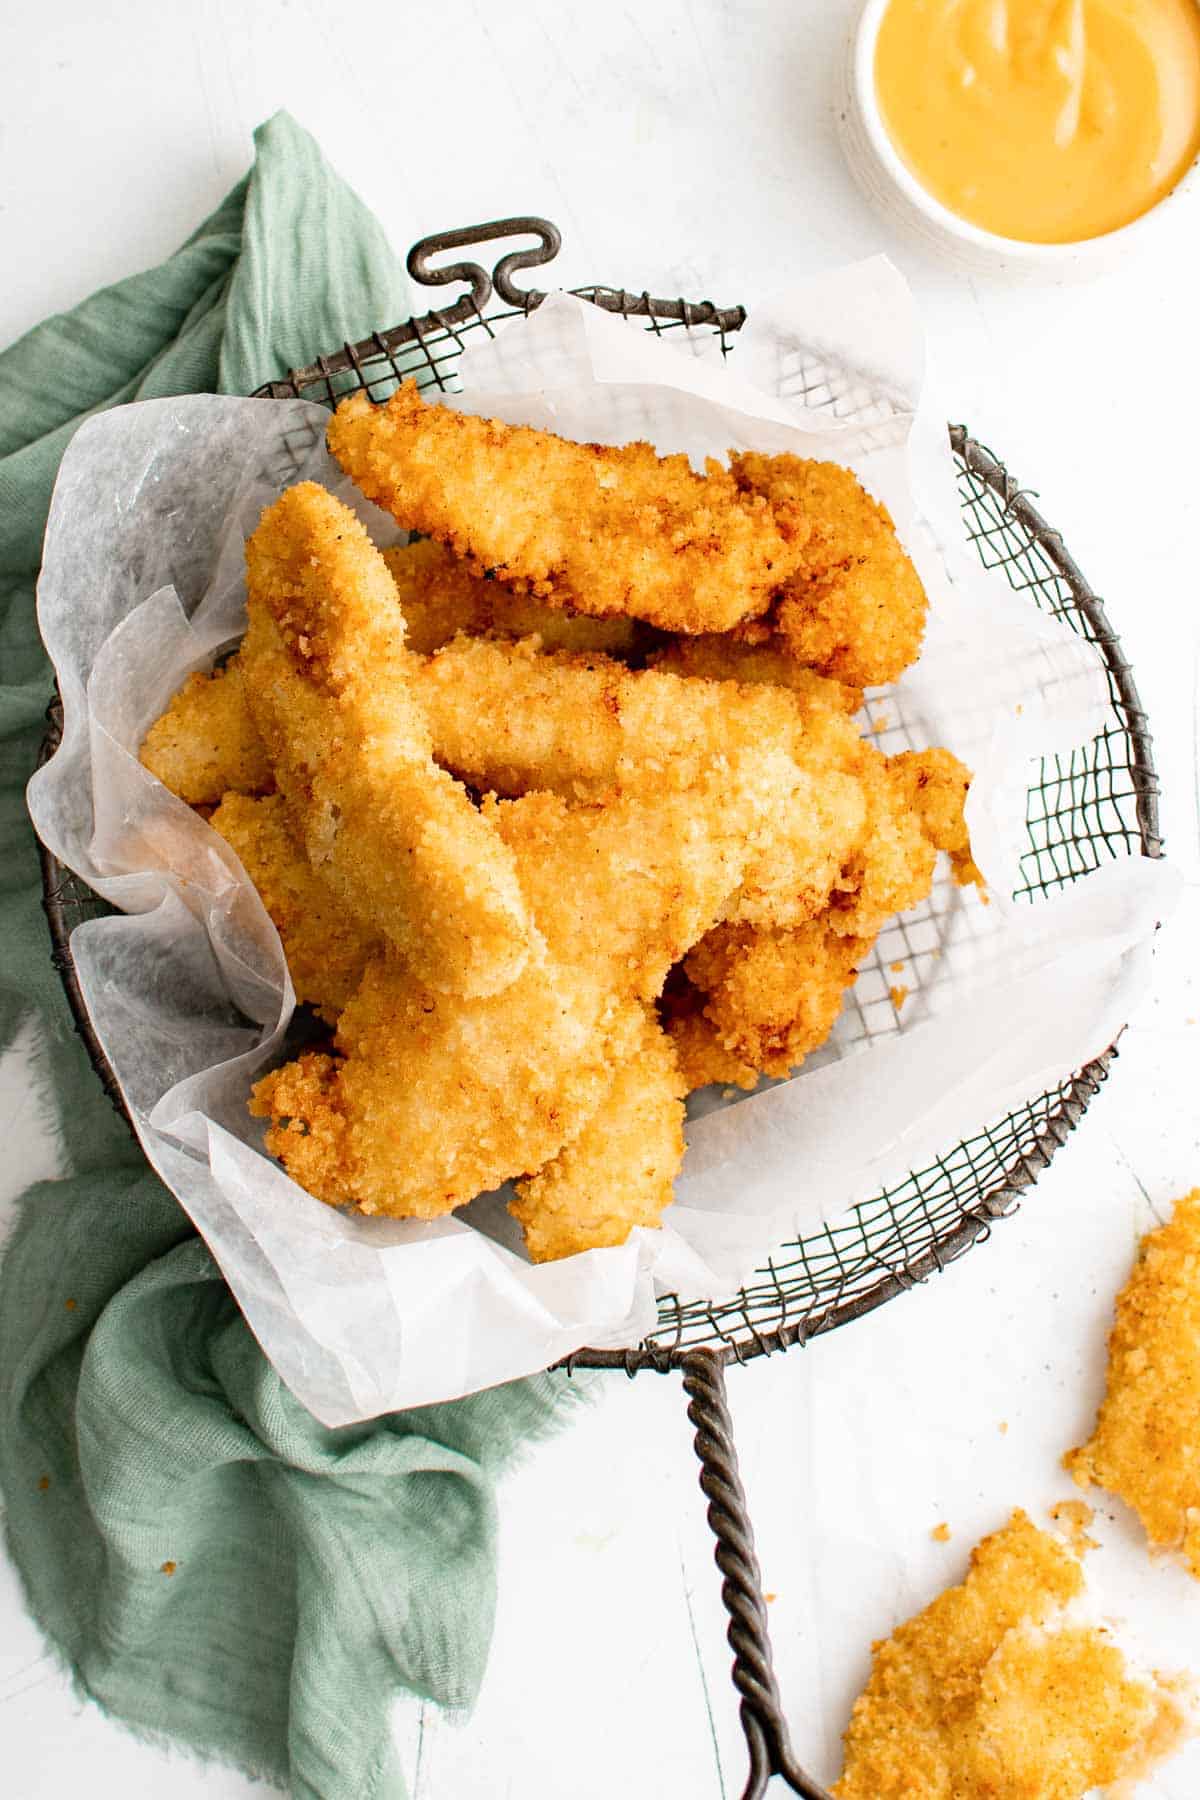 Fried fish sticks in a basket with delicious dipping sauce.